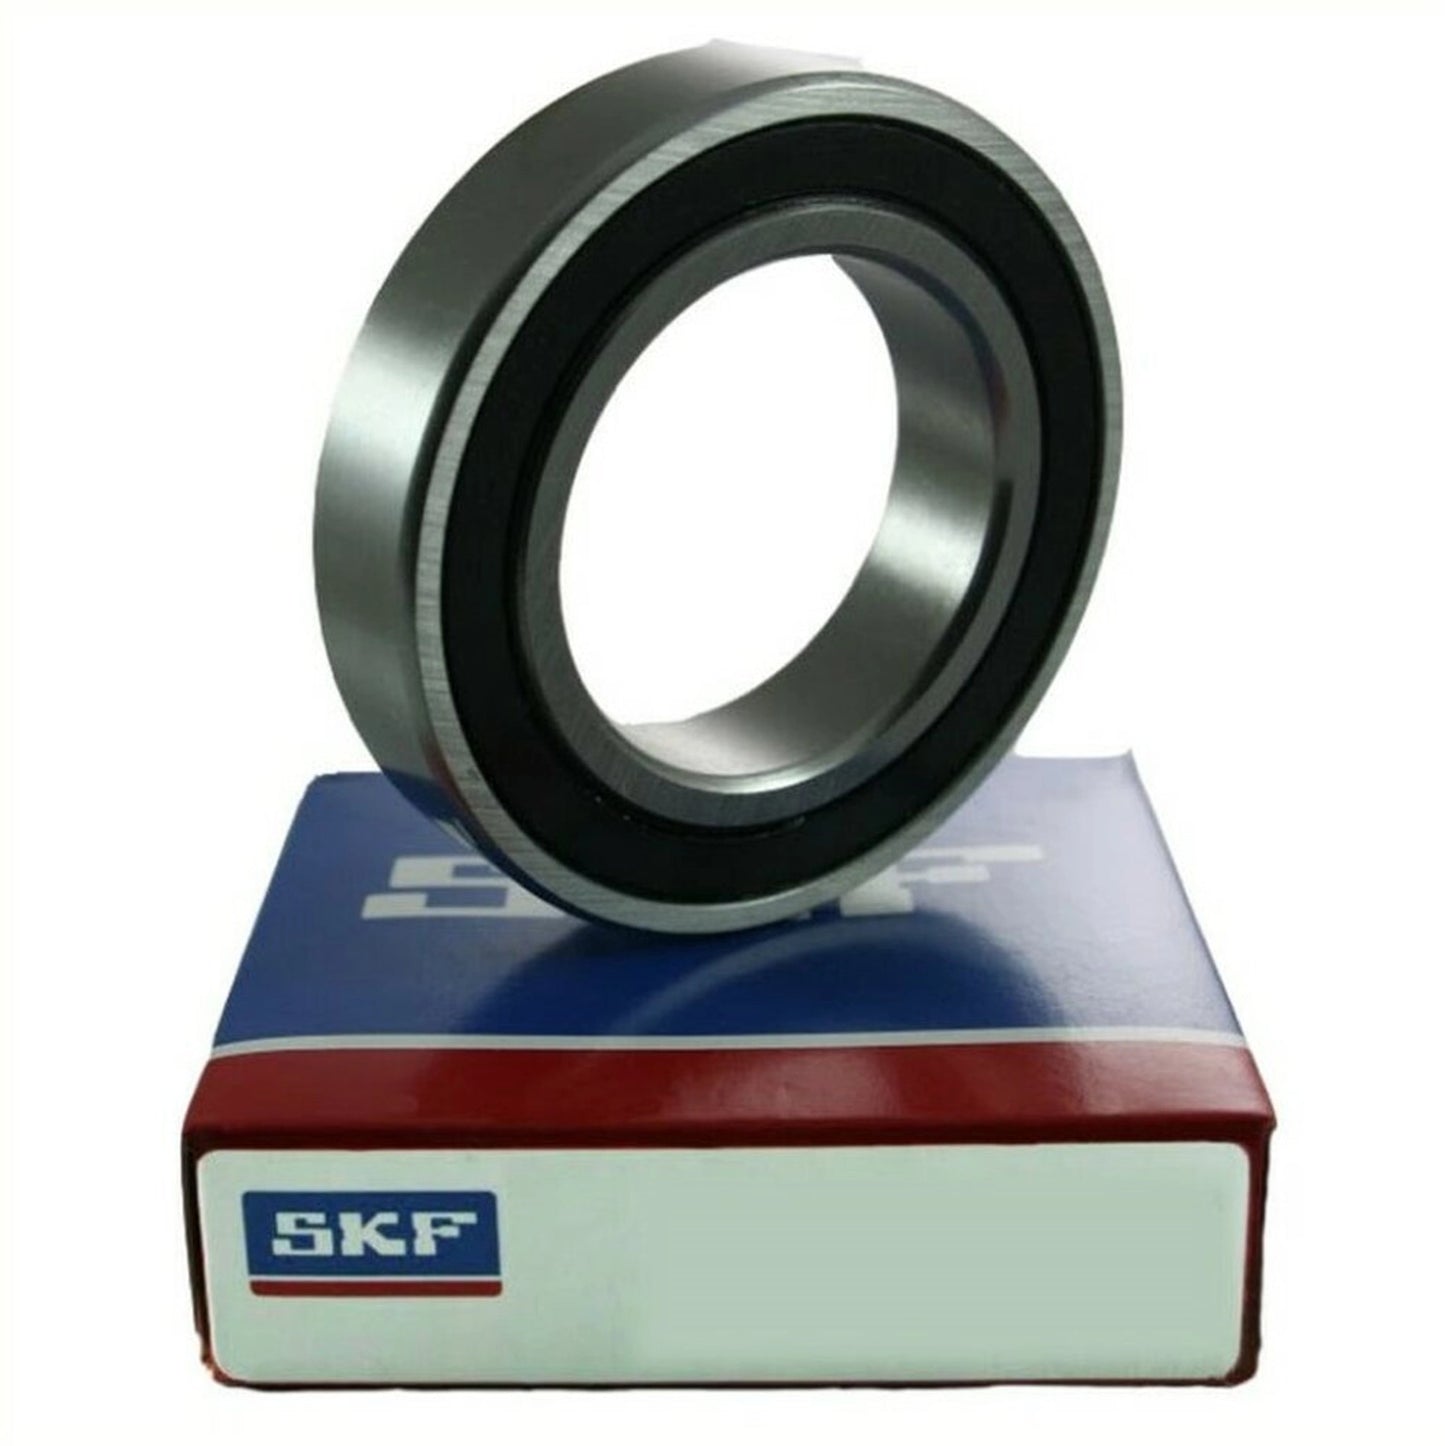 Lager 6008-Rs1 40x68x15 SKF